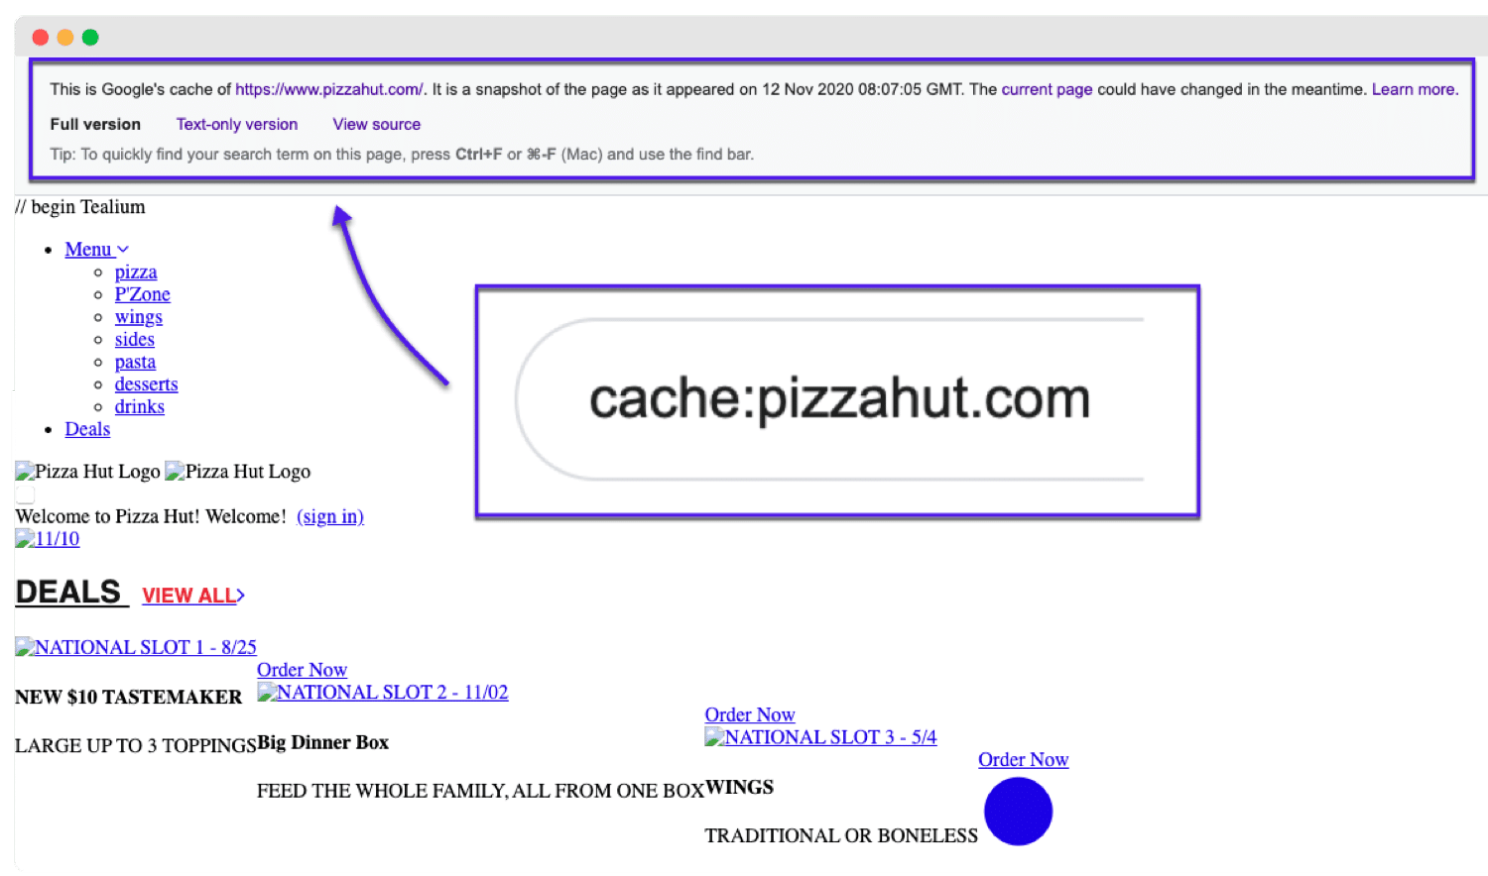 This is Google's cache of hits /iwww.pizzahut conv. It is a snapshot of the page as it appeared on 12 Nov 2020 08:07-05 GMT. The current page could have changed in the meantime. Learn more.

Full version Text-only version View source
Tip: To quickly find your search term on this page. press CtrieF or 3%F (Mac) and use the find bar.

cache:pizzahut.com

   
    
 
   
   
  
  

Pizza Hut Logo Pizza Hut Logo

‘elcome to Pizza Hut! Welcome! (sign in)

NATIONAL SLOT | - 825

Order Now
$10 TASTEMAKER » NATIONAL SLOT 2 - 11/02
w
LARGE UP TO 3 TOPPING SBig Dinner Box wo NATIONAL SLOT 3 - 5/4

Order Now
FEED THE WHOLE FAMILY, ALL FROM ONE BOXWINGS O

TRADITIONAL OR BONELESS